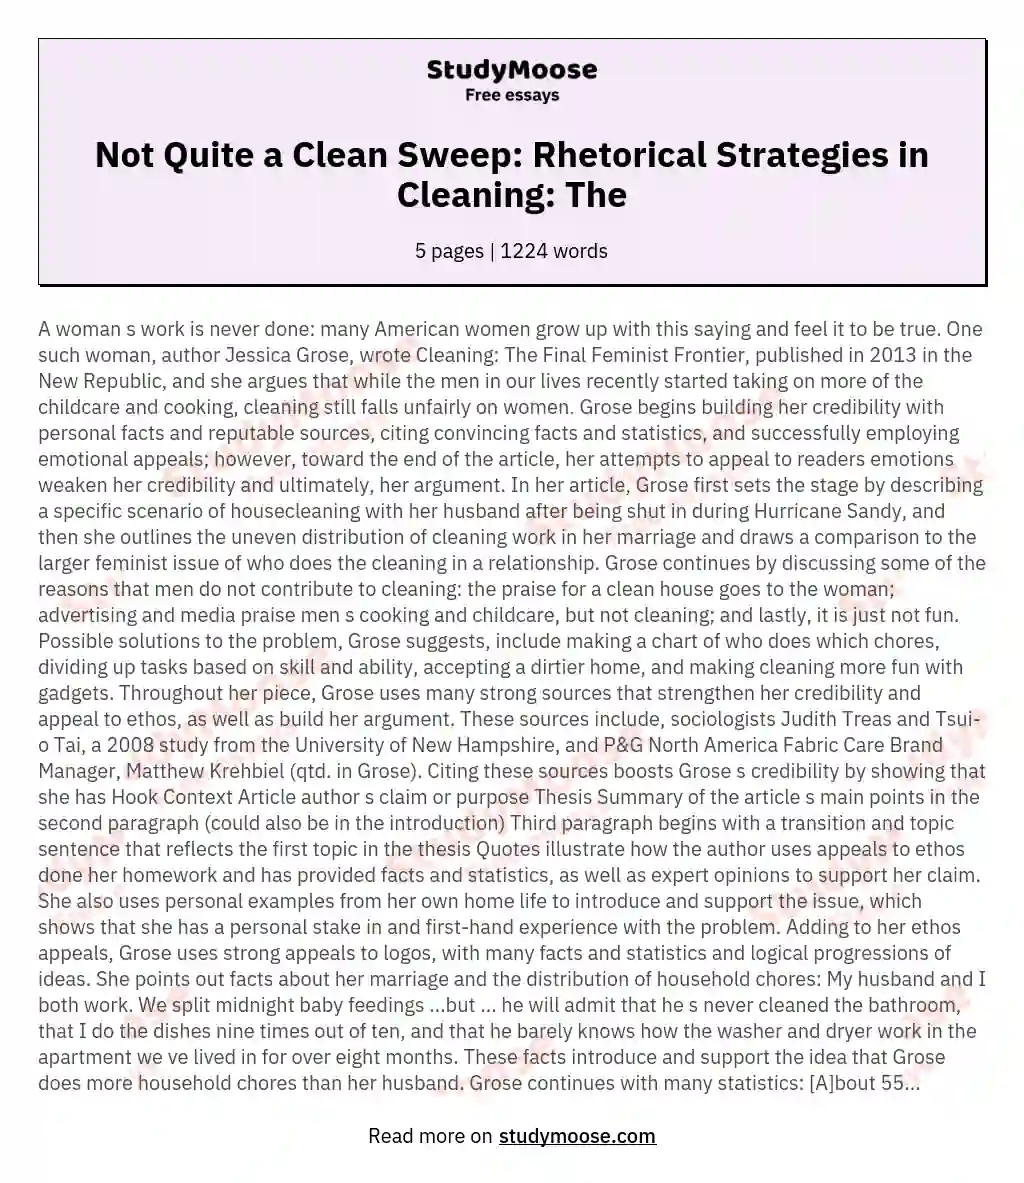 Not Quite a Clean Sweep: Rhetorical Strategies in Cleaning: The essay